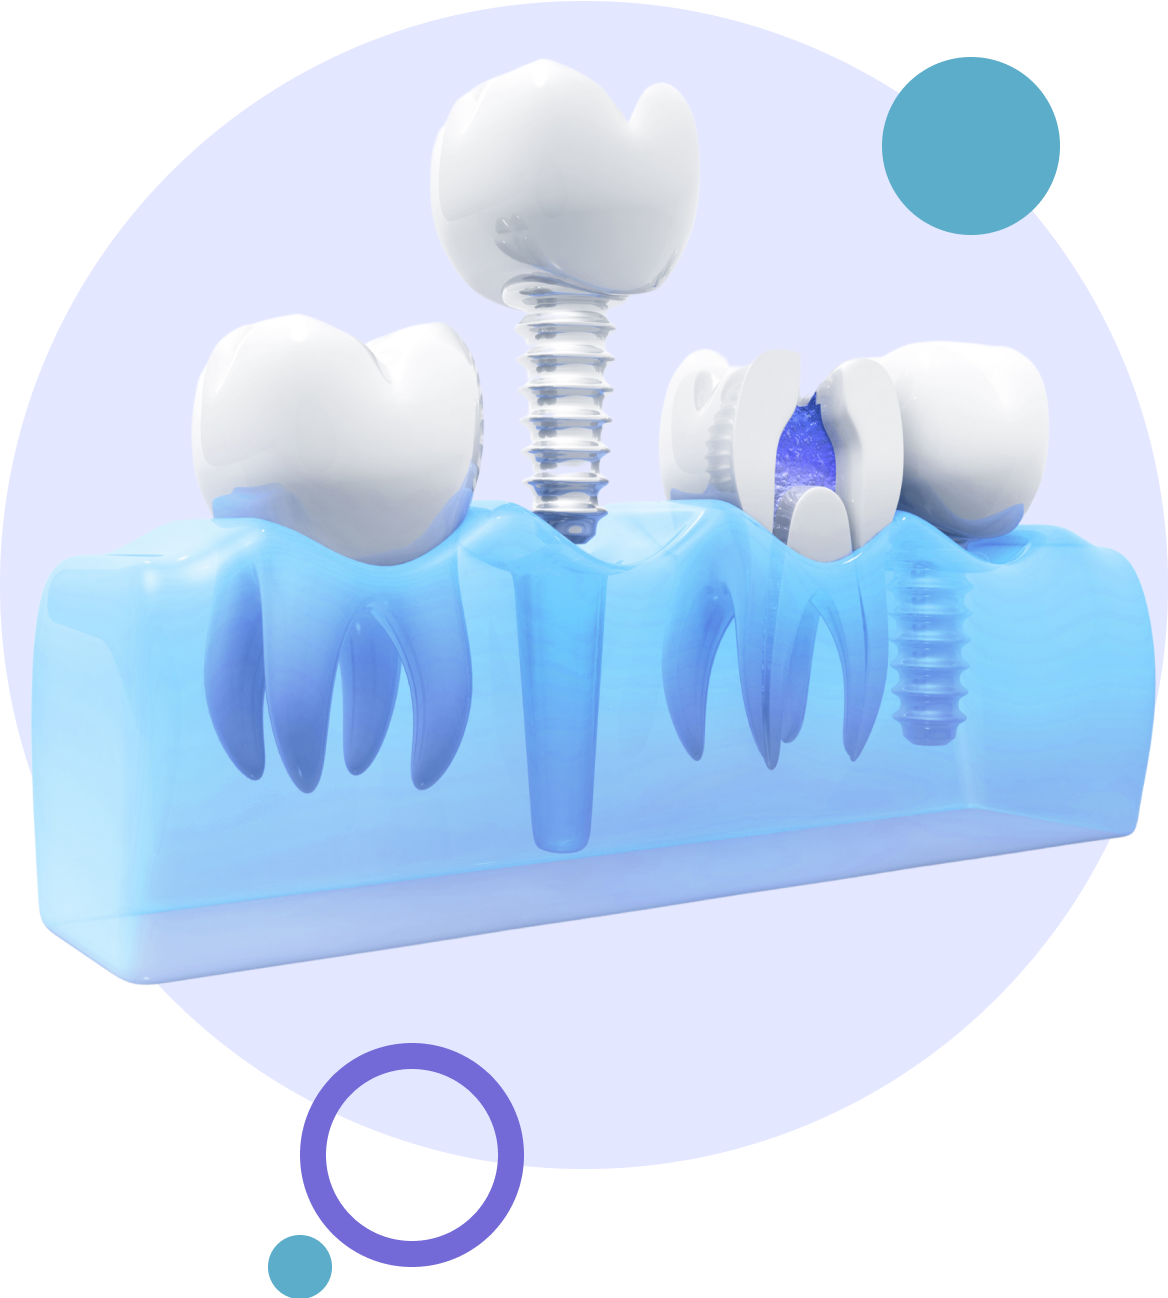 Image of how a dental implant is attached into the jawbone